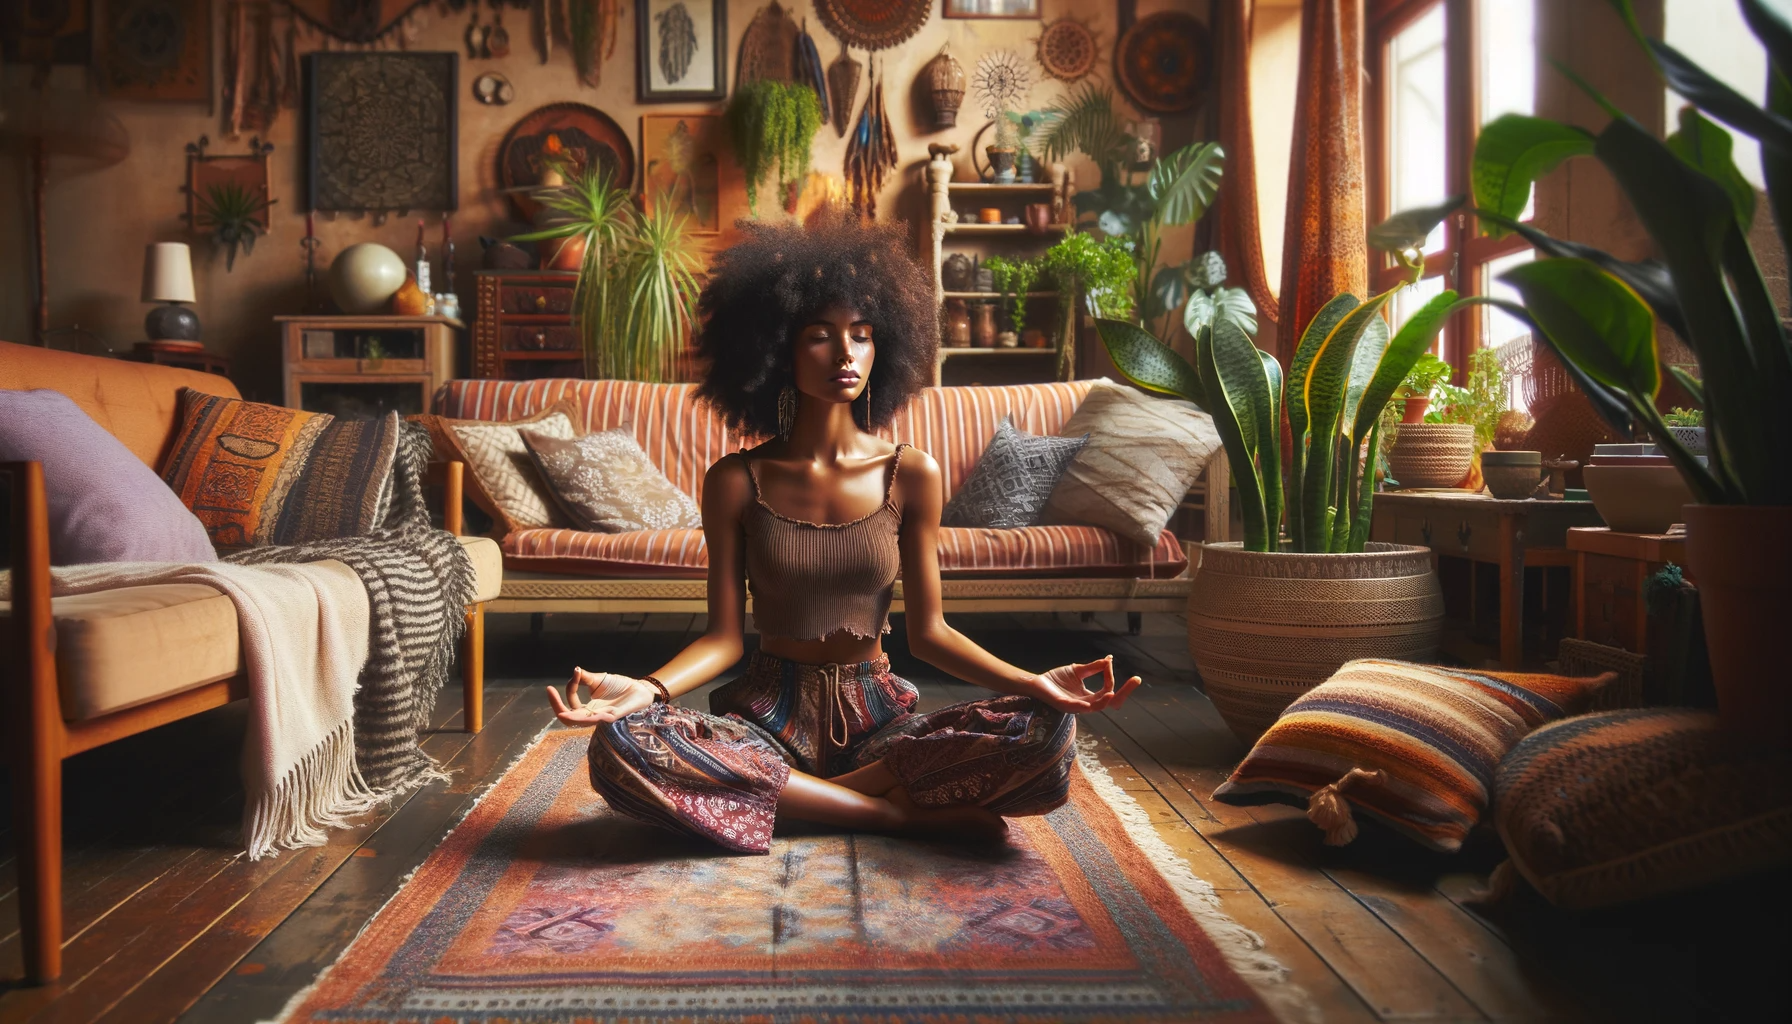 An-image-of-an-Afro-bohemian-chic-woman-meditating-in-her-living-room-reflecting-a-sense-of-peace-and-mindfulness.-The-setting-should-be-a-cozy